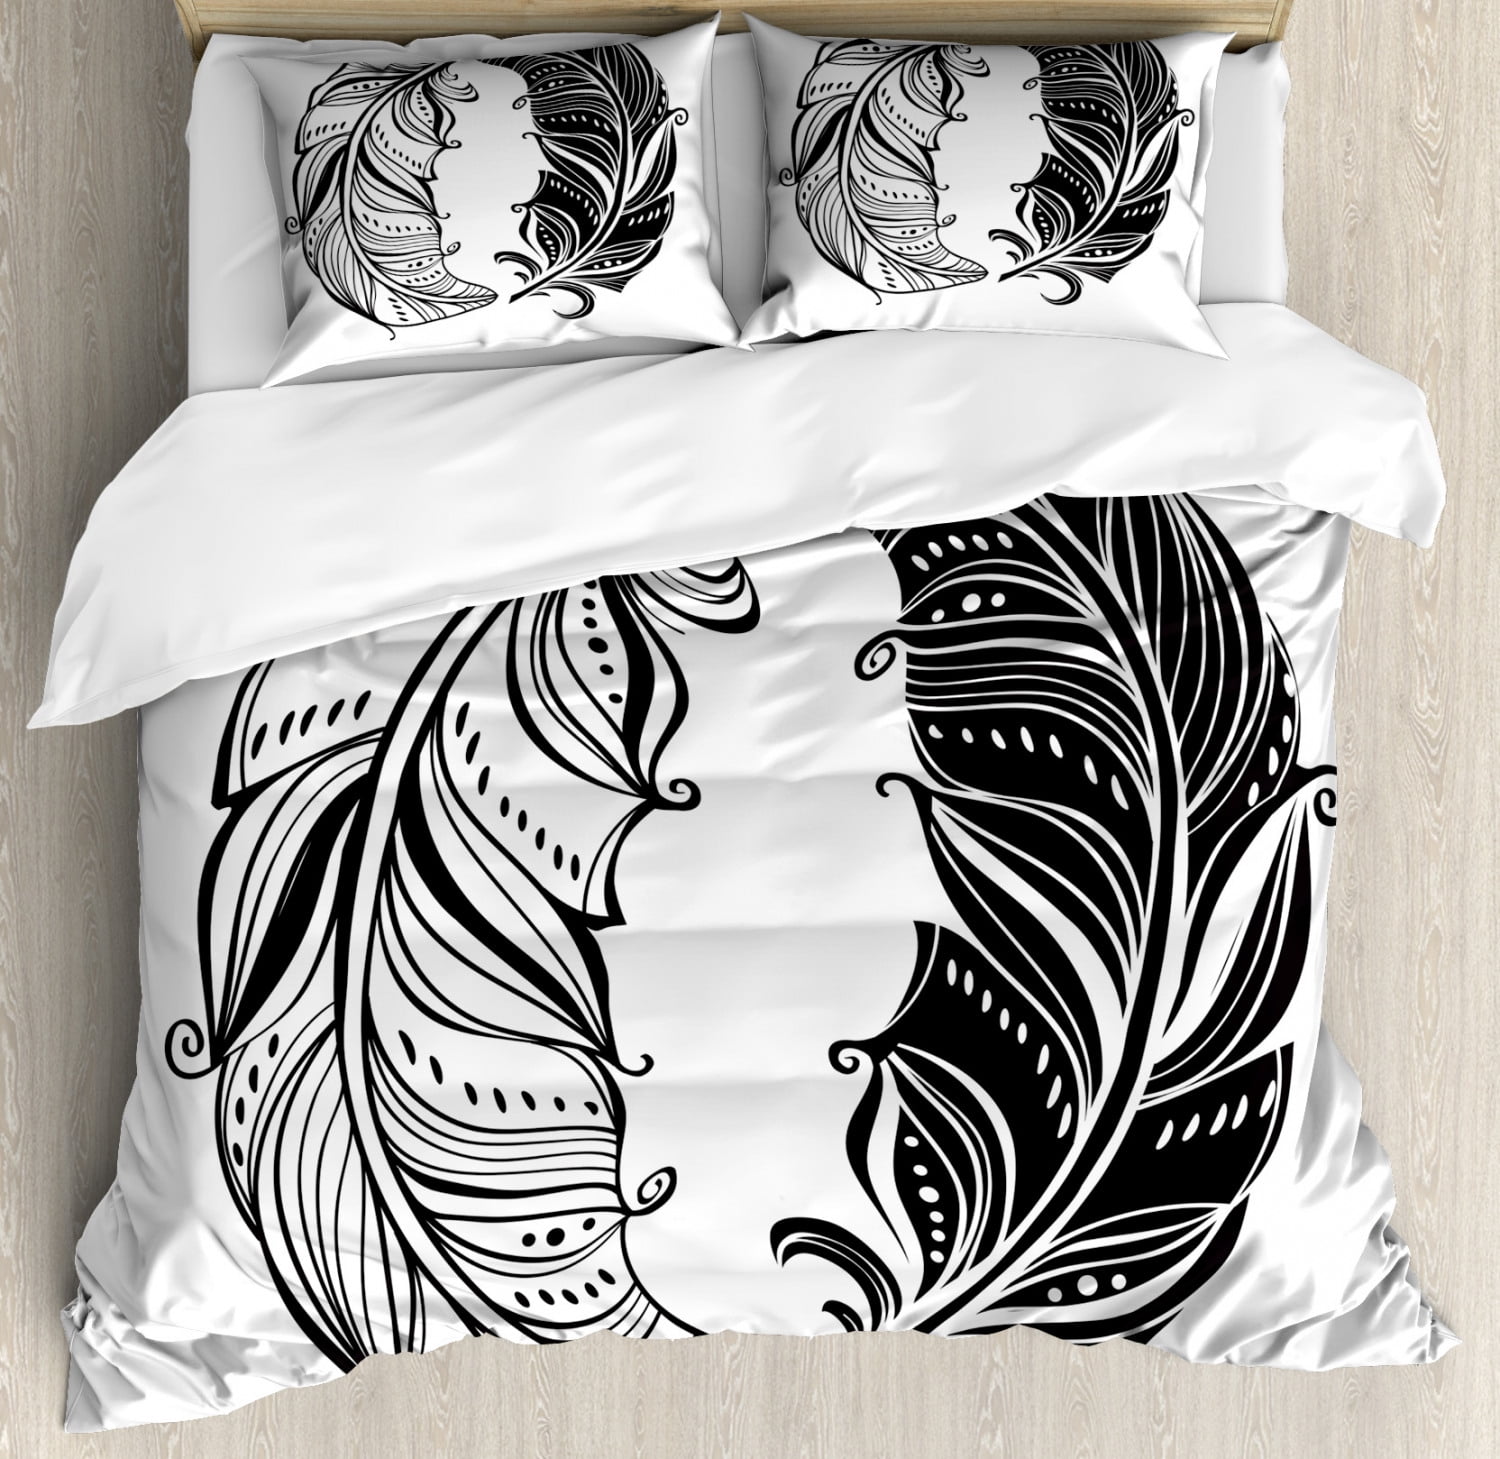 Black And White Duvet Cover Set King Size Boho Style Abstract Yin